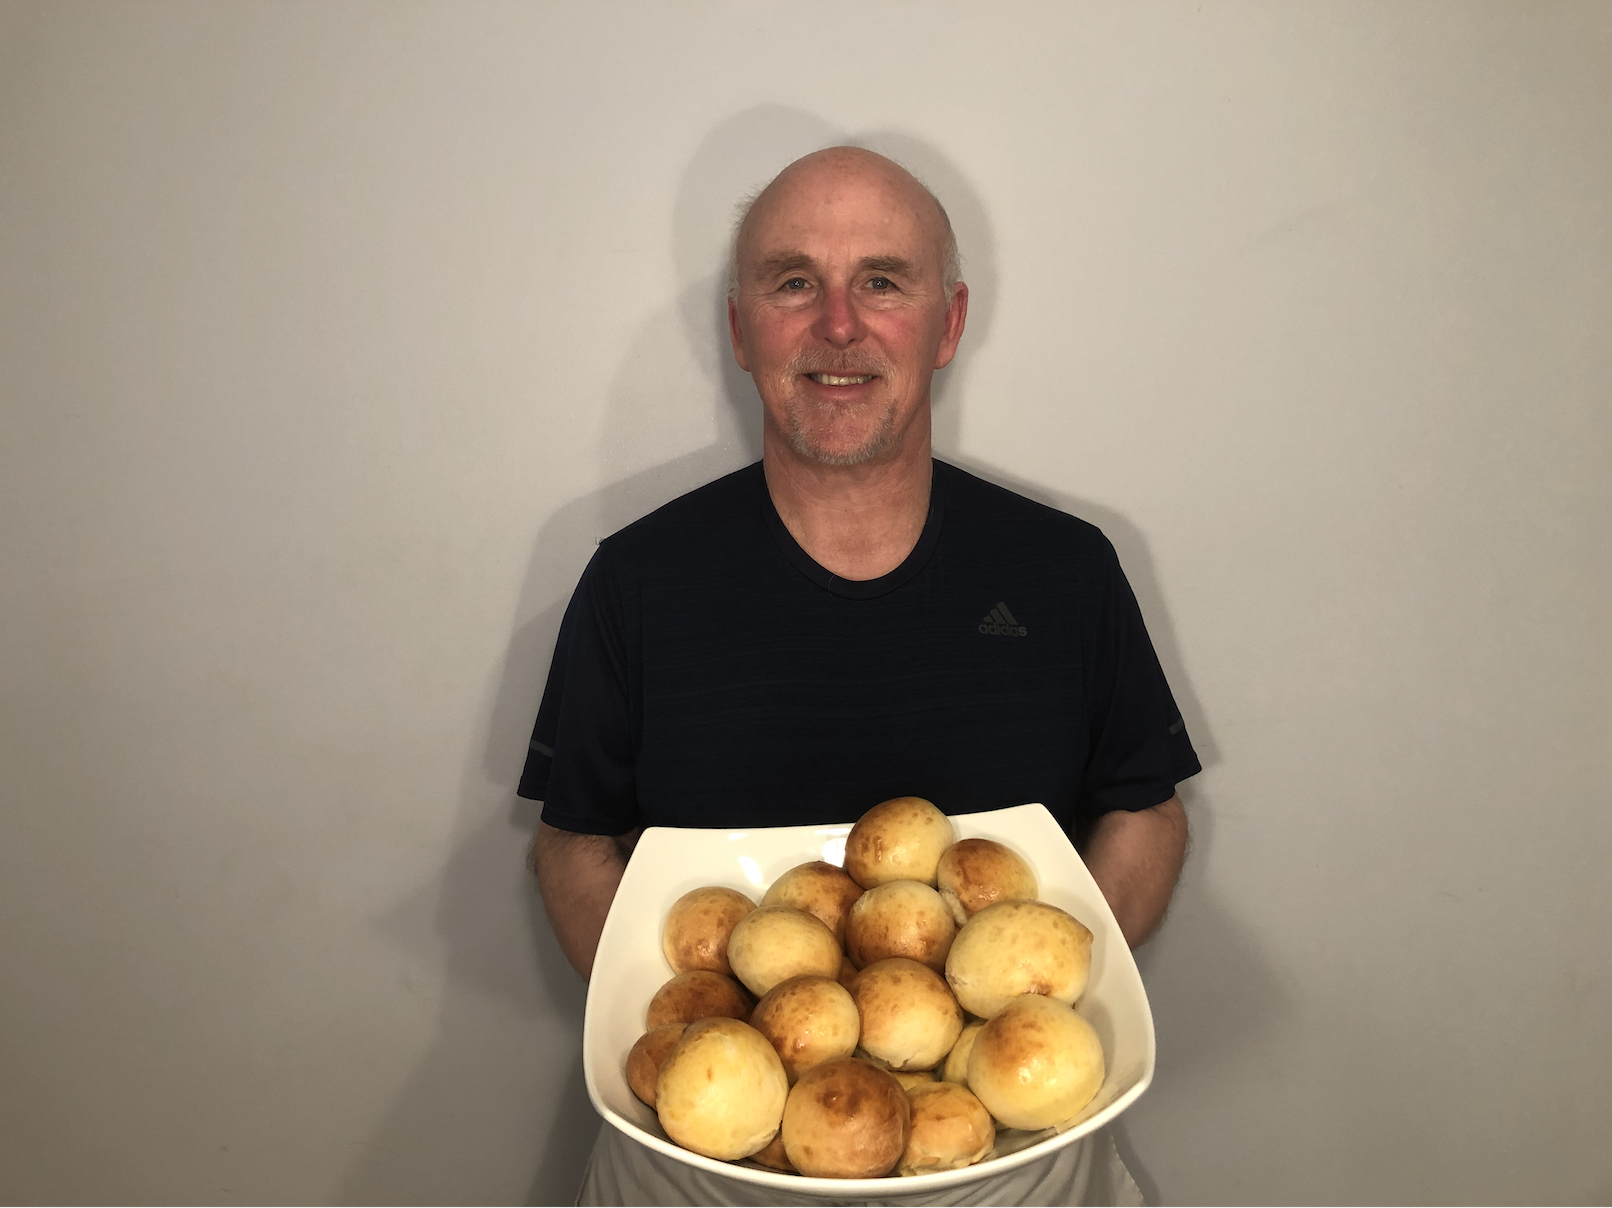 A photo of Chef Rob holding a plate of dinner rolls.